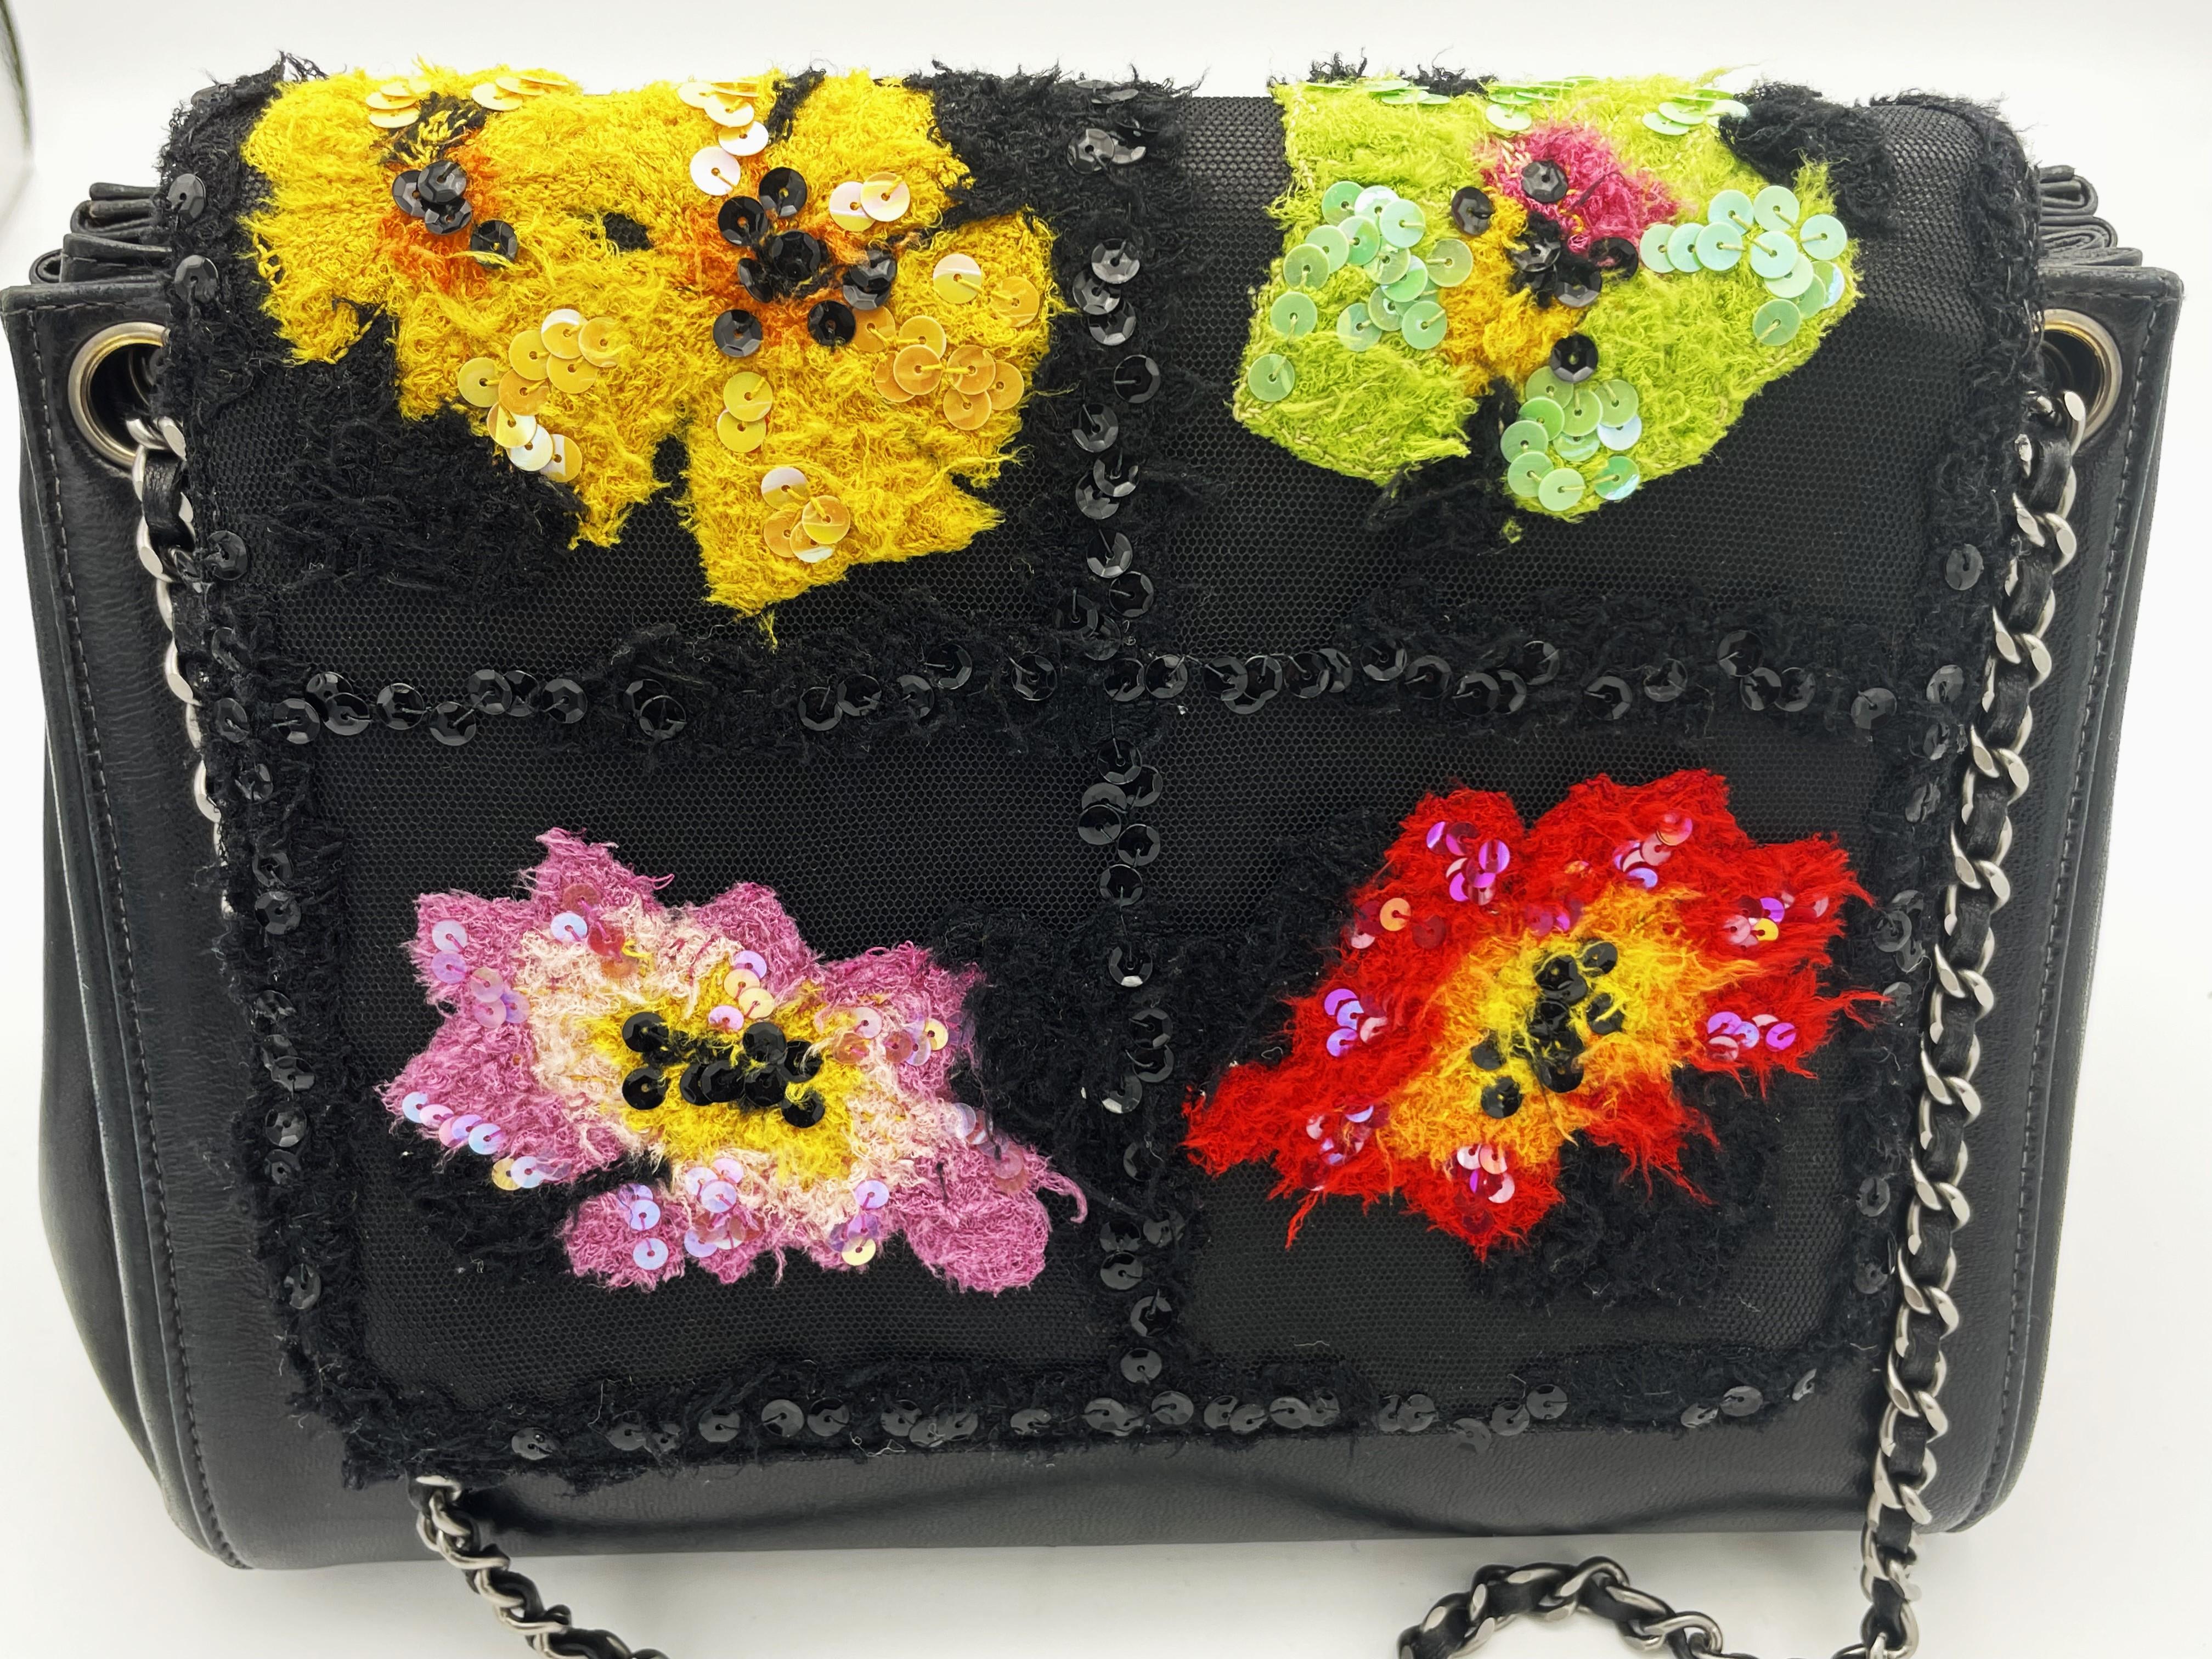  CHANEL bag, black lambs skin with colorful flowers, double chain from the 1990s 7